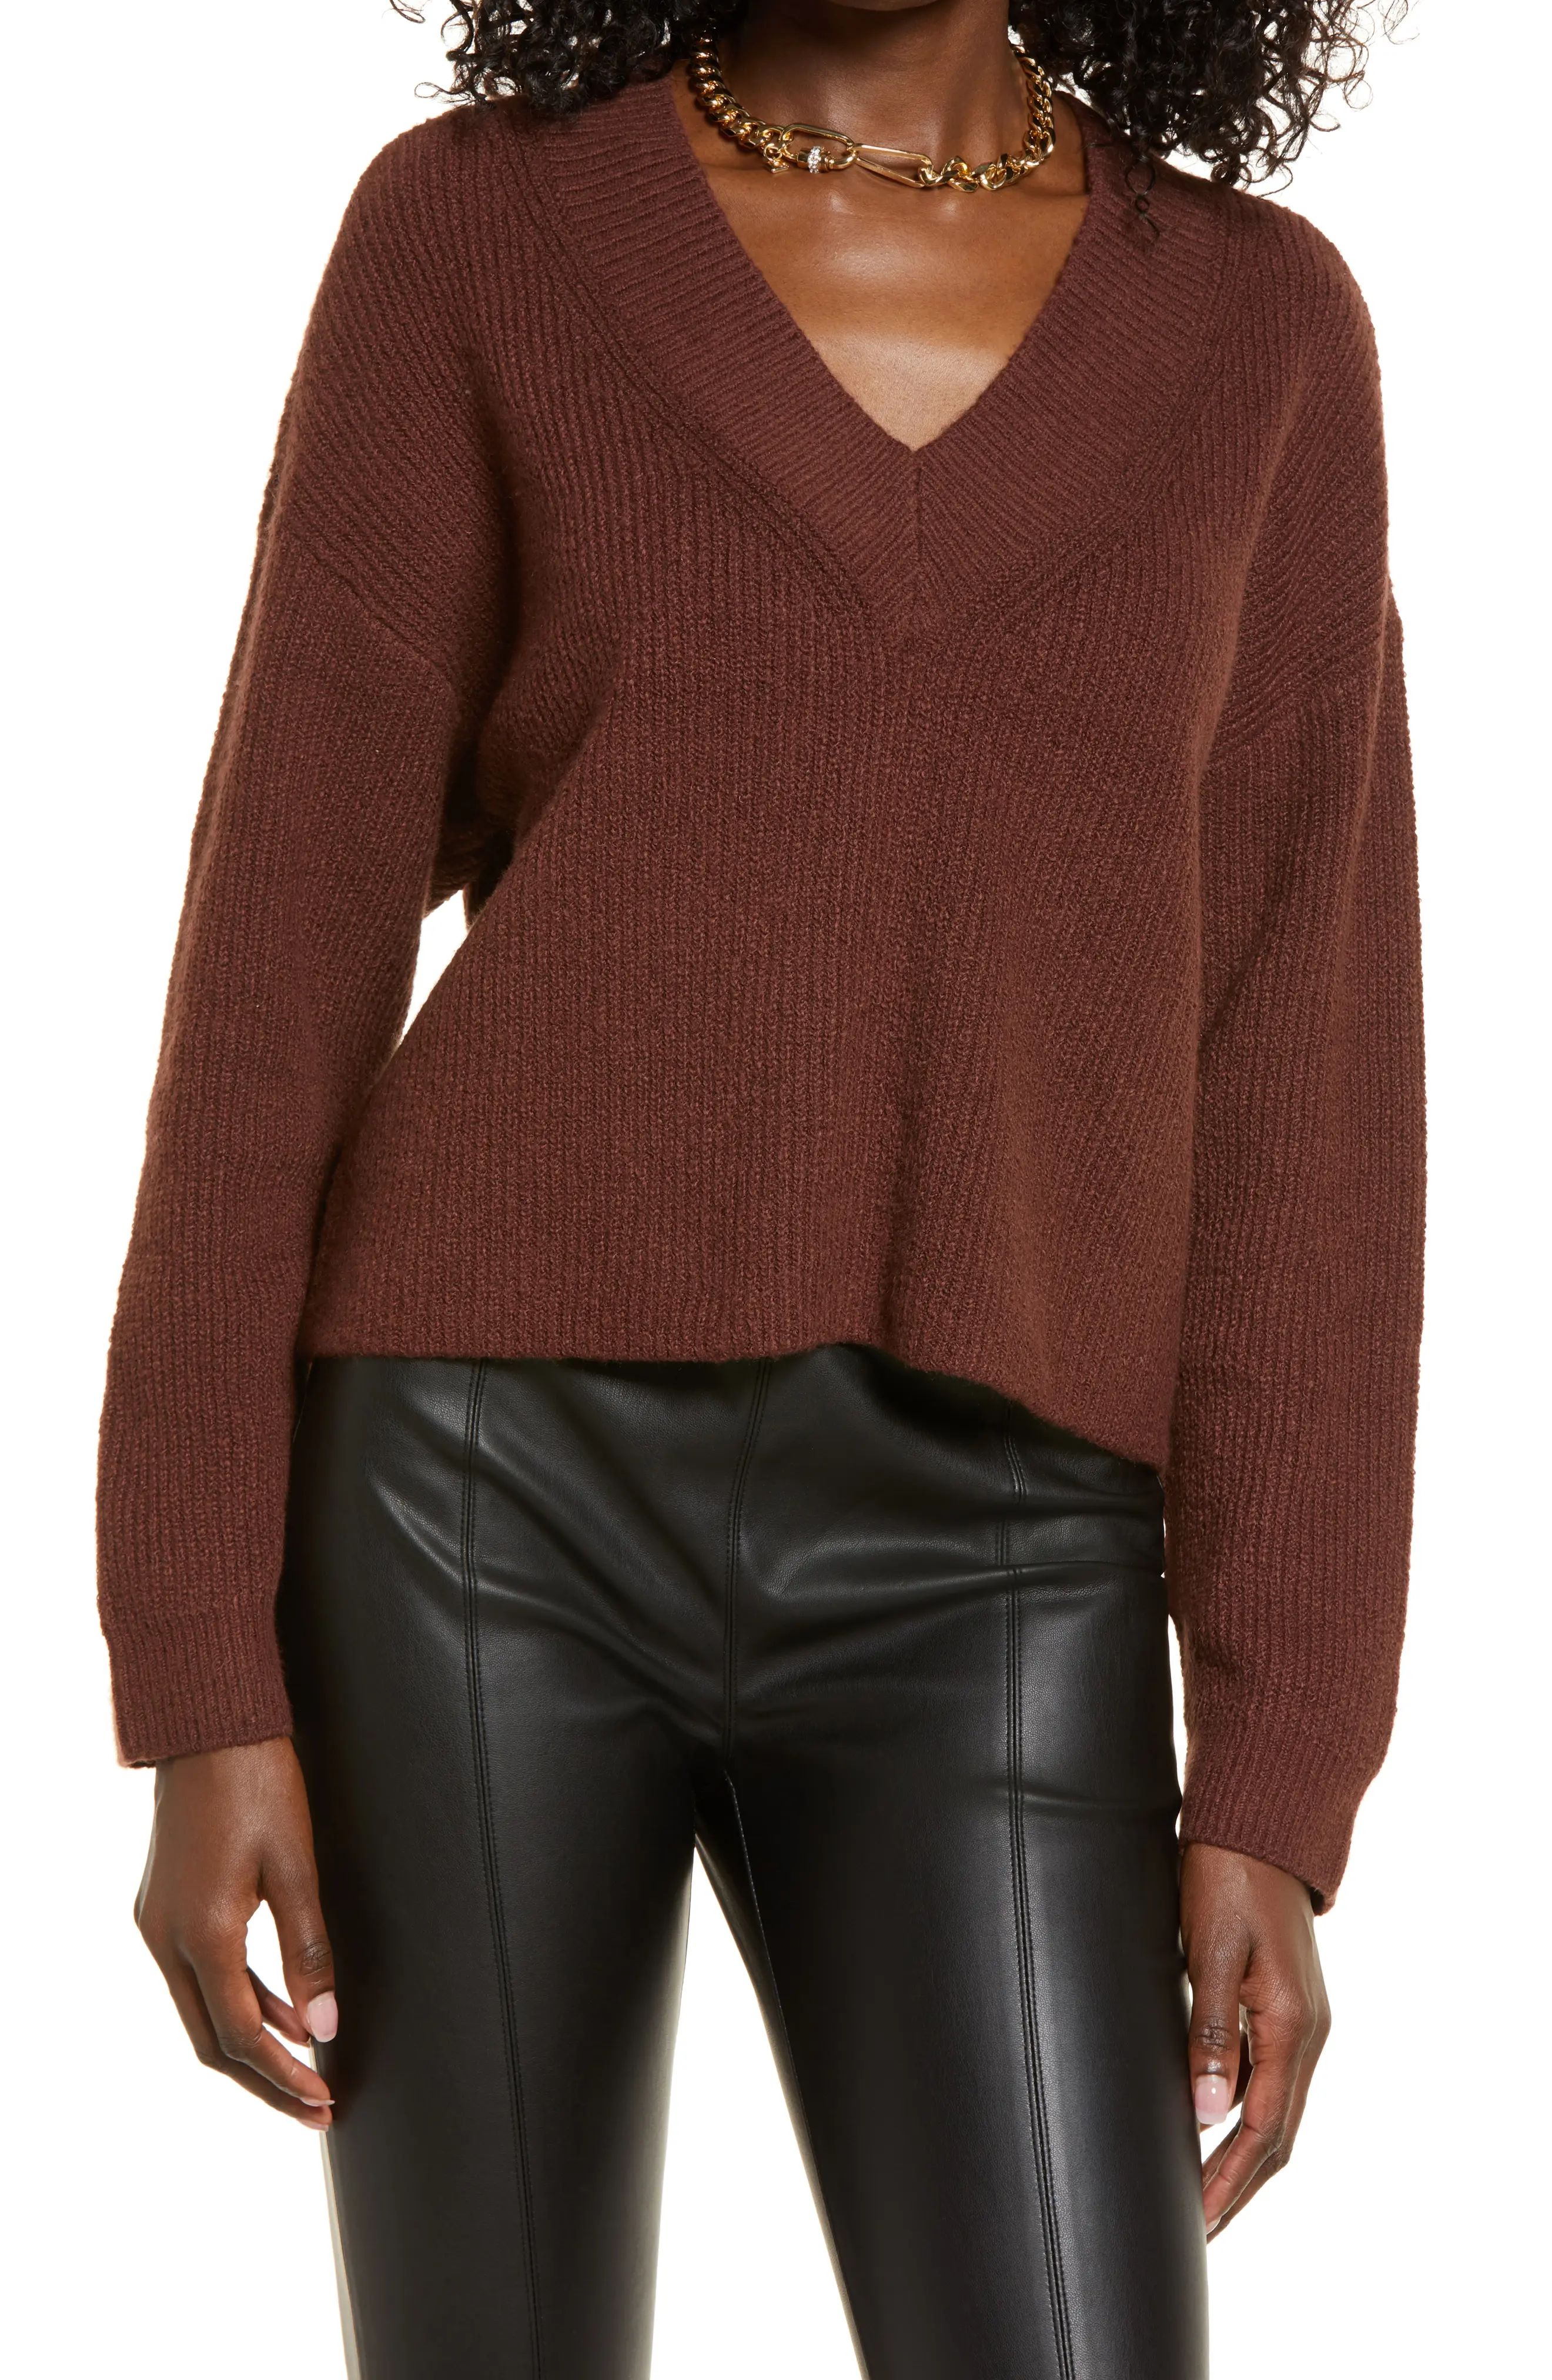 Open Edit Rib Stitch Sweater, Size Small in Brown Chocolate at Nordstrom | Nordstrom